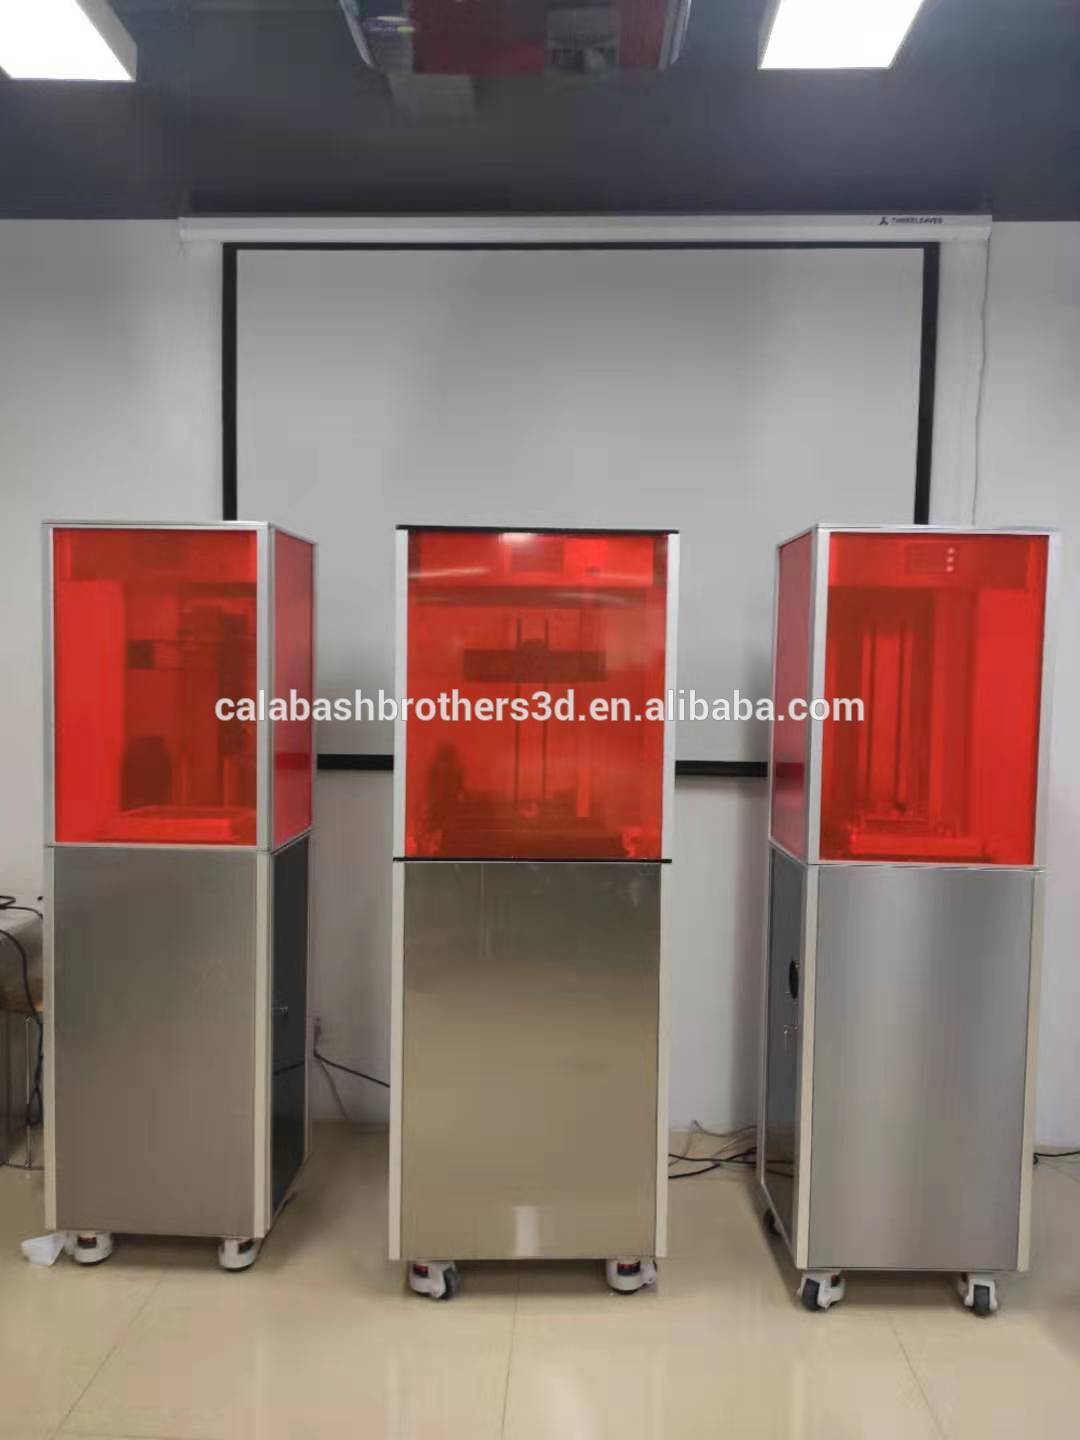 High Accuracy 0.05mm Industrial Professional 3D Printer Machine Large 4K DLP Printer Build Size 380*210*360mm